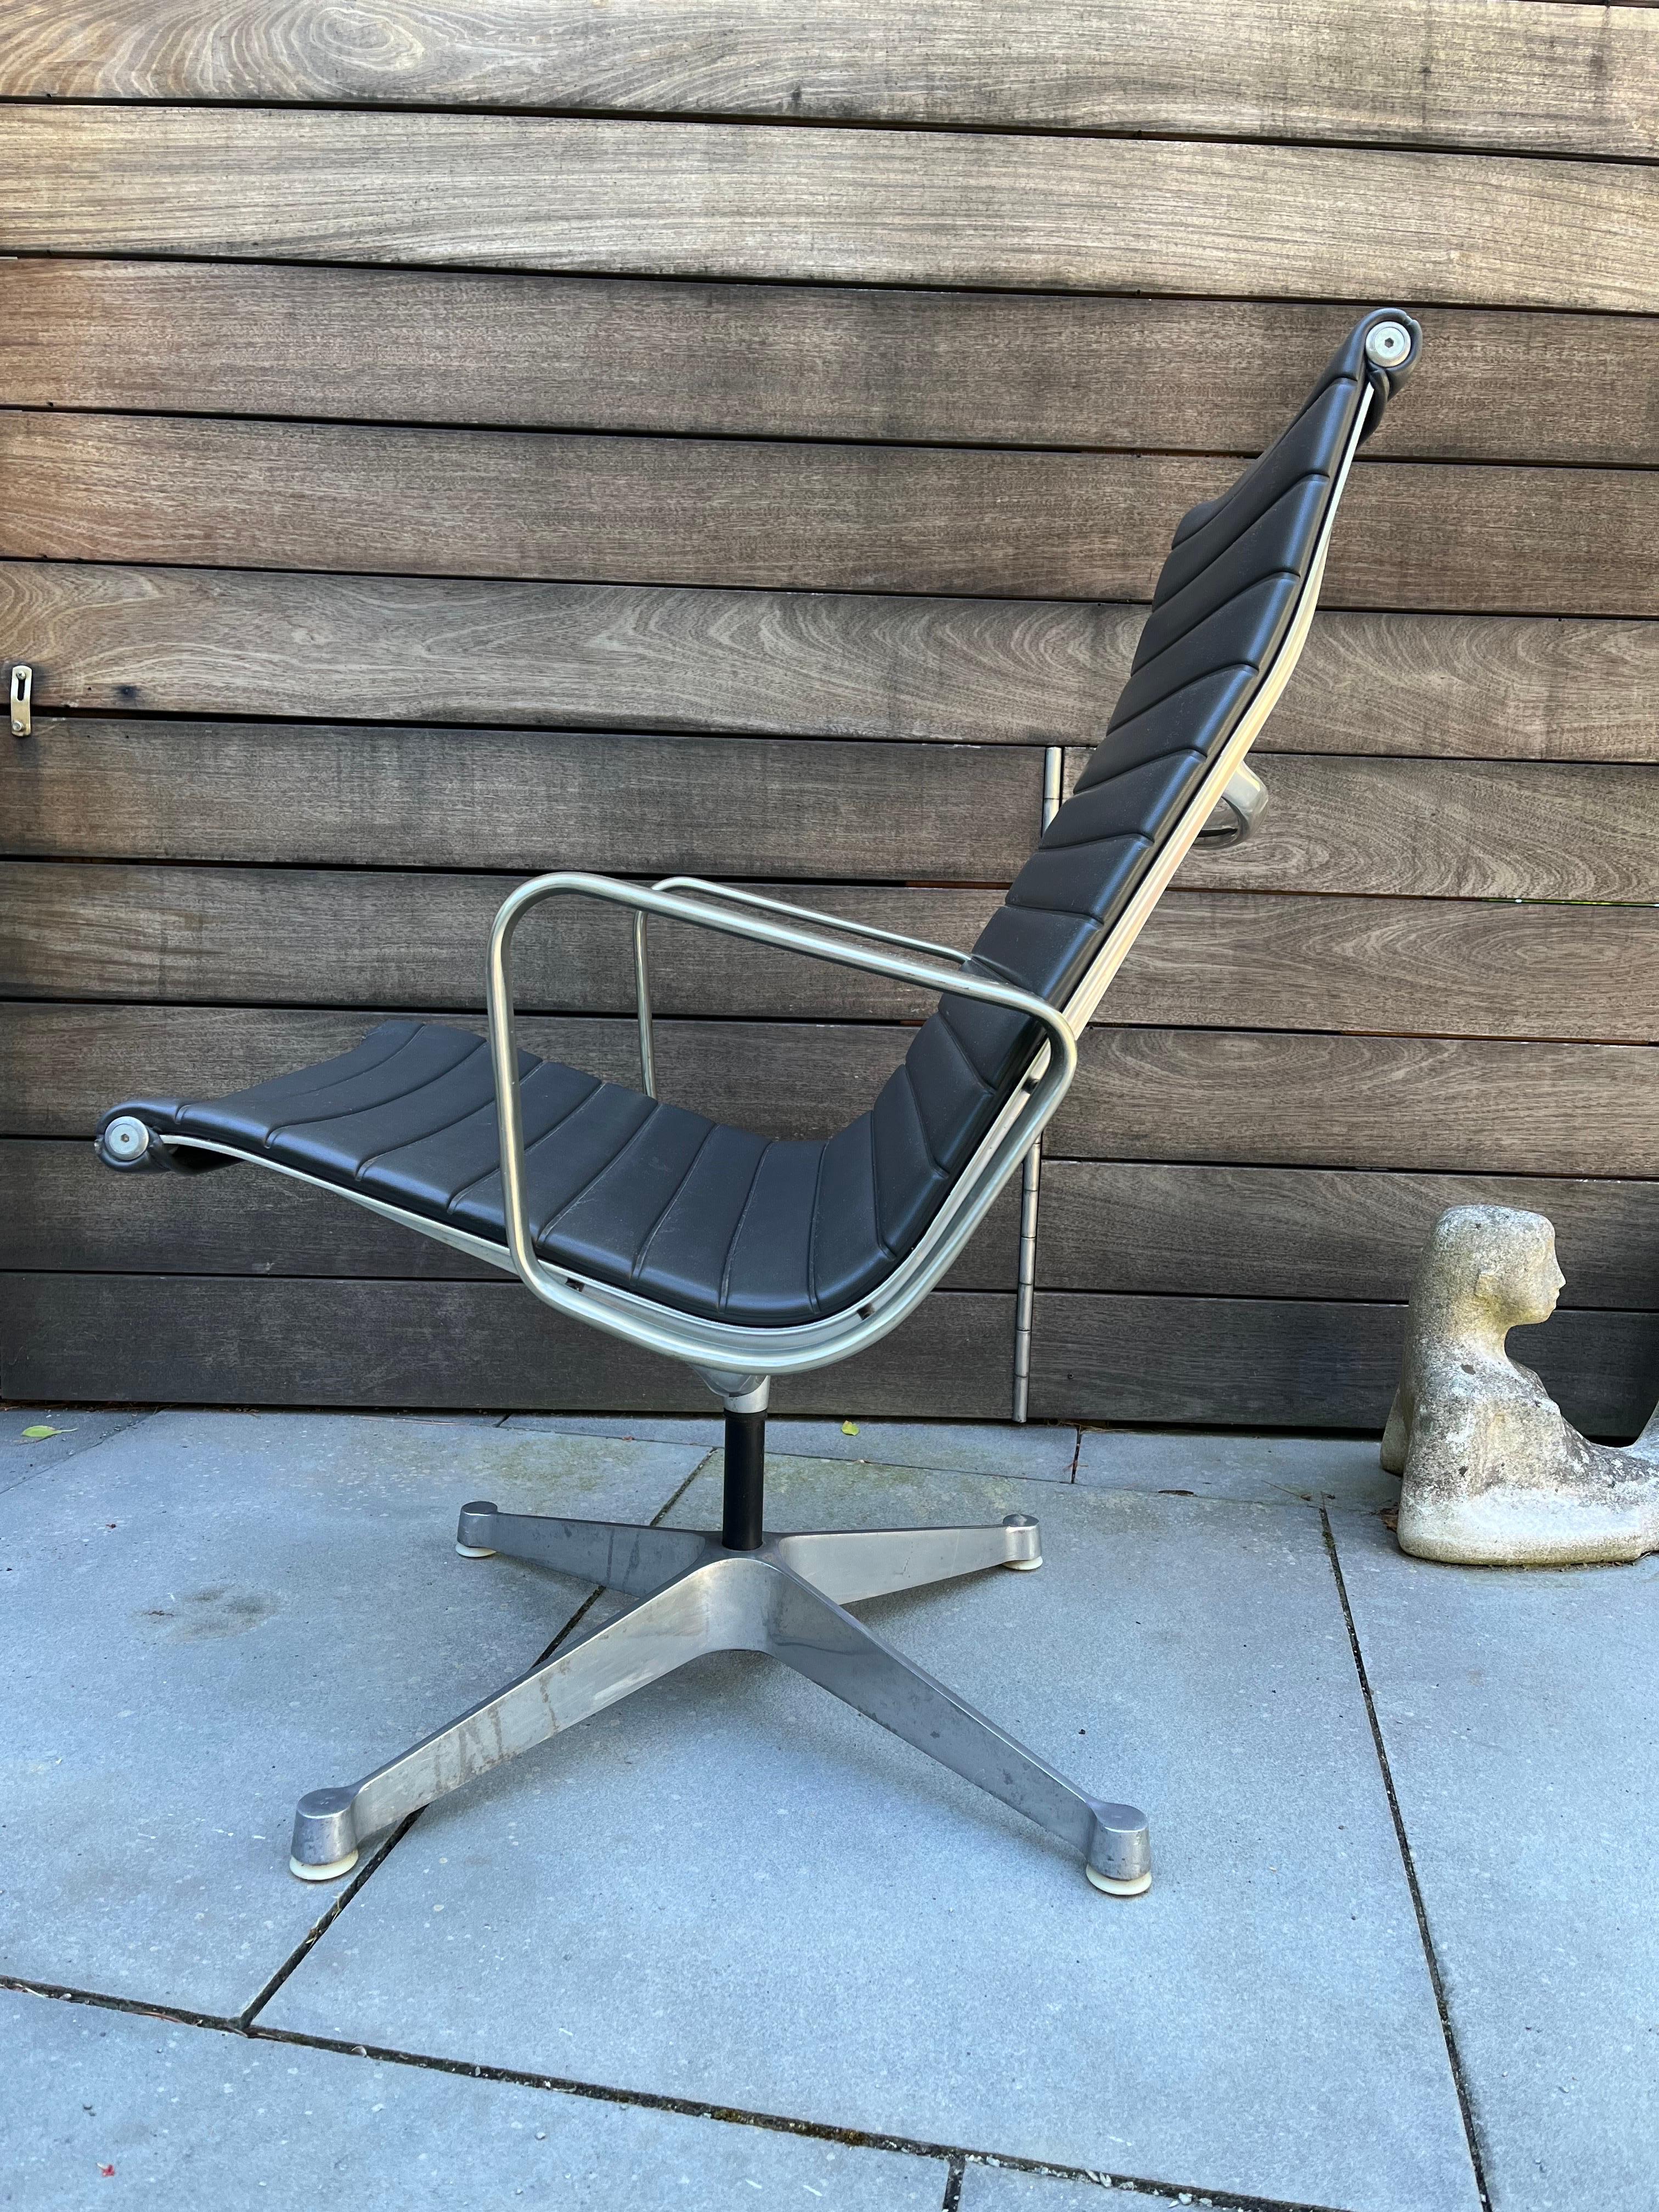 Eames Aluminum Group Chair by Herman Miller. Older 4 prong Base design. Presents very well, has one area of damage front left corner as seen in photo. This model does not tilt or go up and down. Swivel works well.